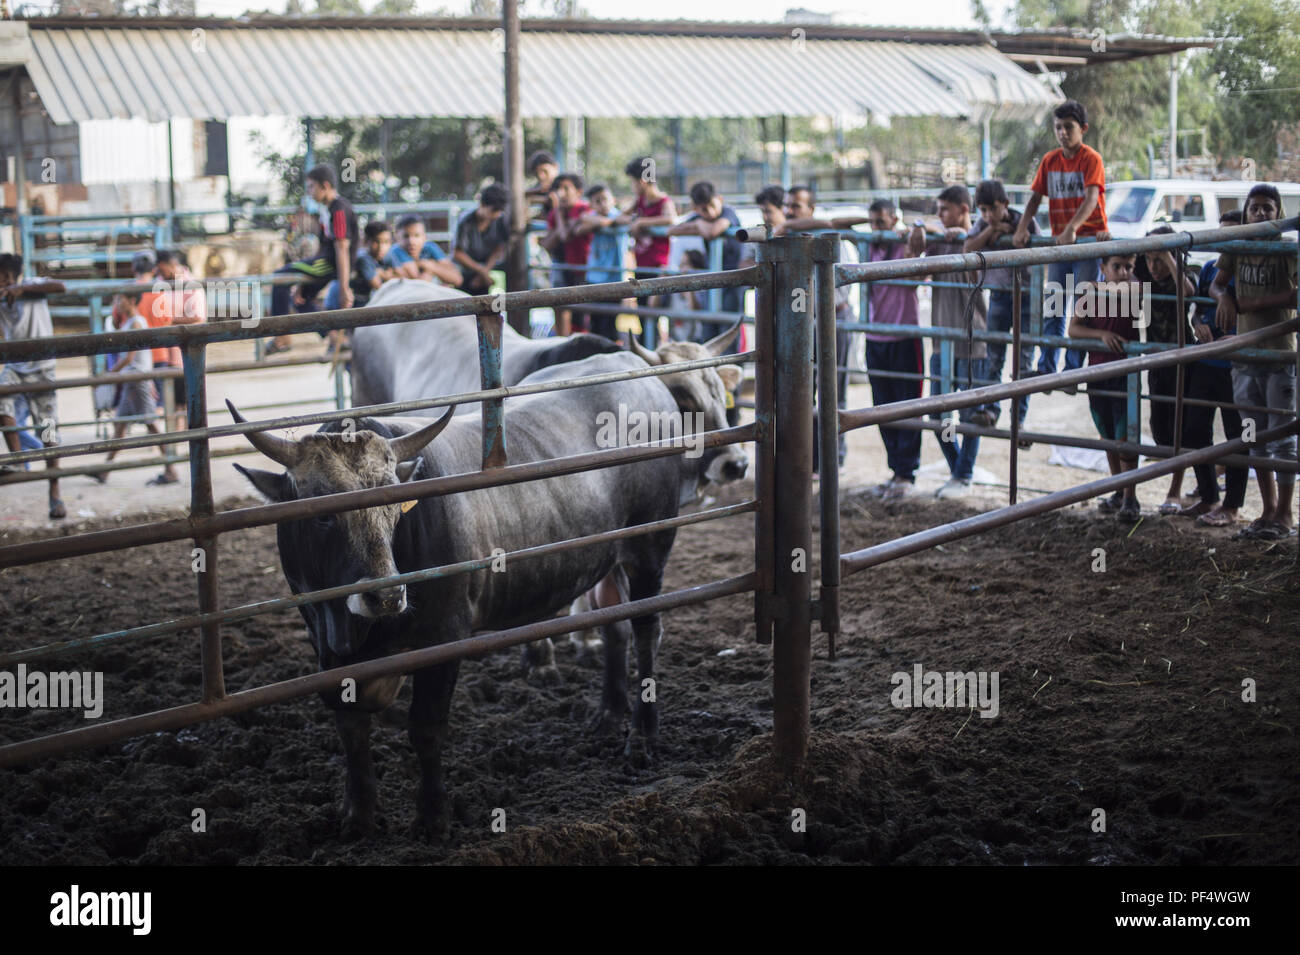 Gaza City, The Gaza Strip, Gaza. 18th Aug, 2018. Children seen watching the bulls at the cattle shop.Palestinians gather in a cattle shop to purchase cattles to be sacrificed. before Eid al-Adha in the east of Jabalya refugee camp. Eid al-Adha (Festival of Sacrifice) is celebrated throughout the Islamic world as the commemoration of Abraham's will to sacrifice his son for God, cows, camels, goats and sheep are traditionally slaughtered on the Holy Day. Credit: Mahmoud Issa/SOPA Images/ZUMA Wire/Alamy Live News Stock Photo